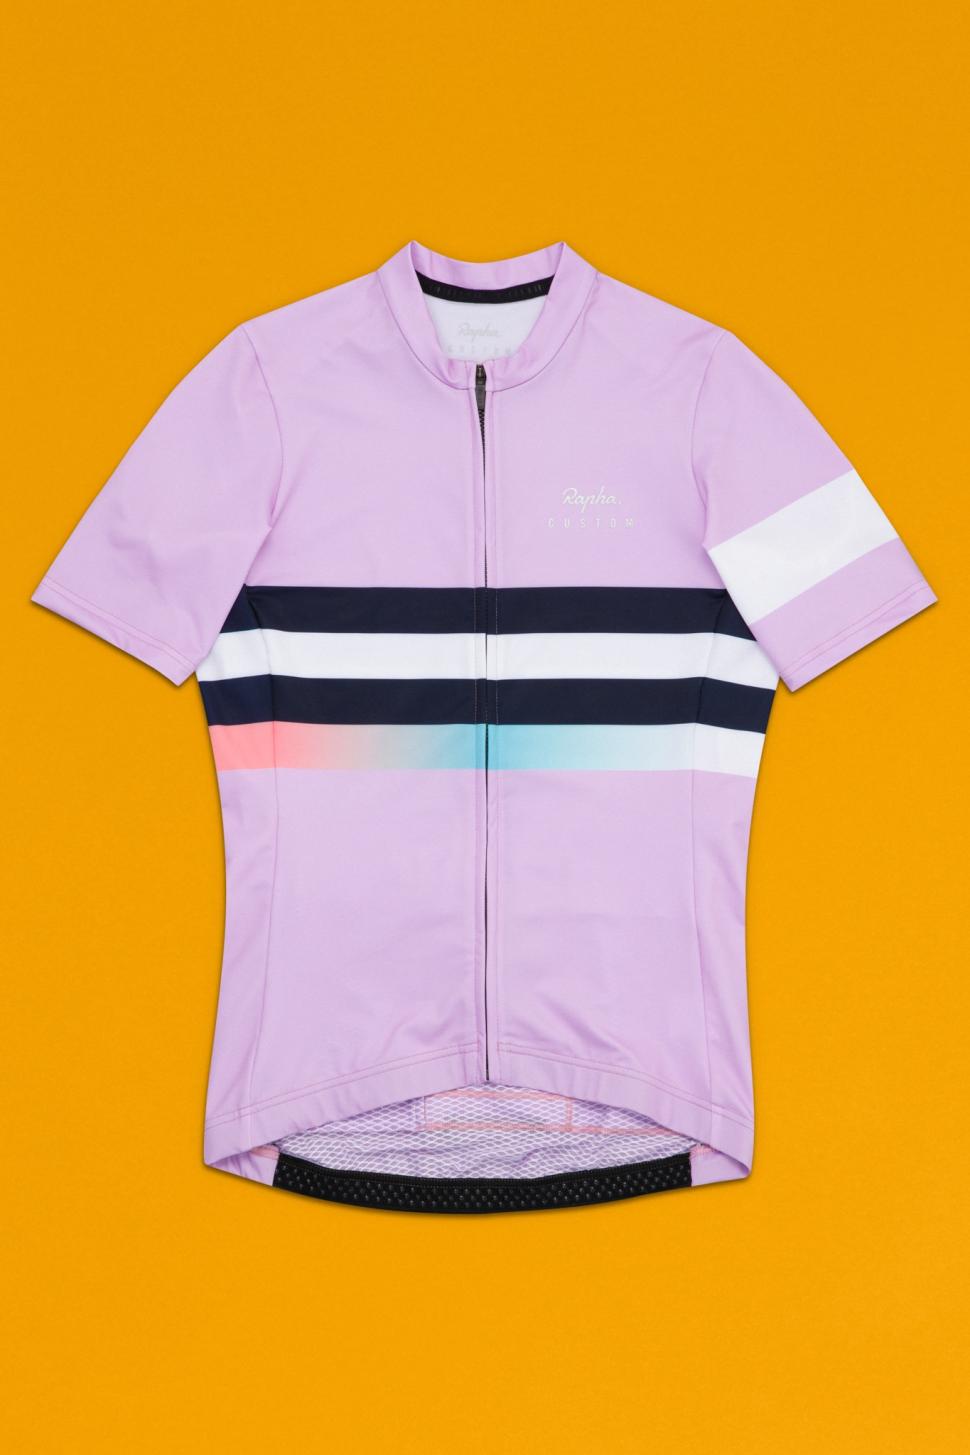 Rapha launches custom kit with user-friendly online design system road.cc